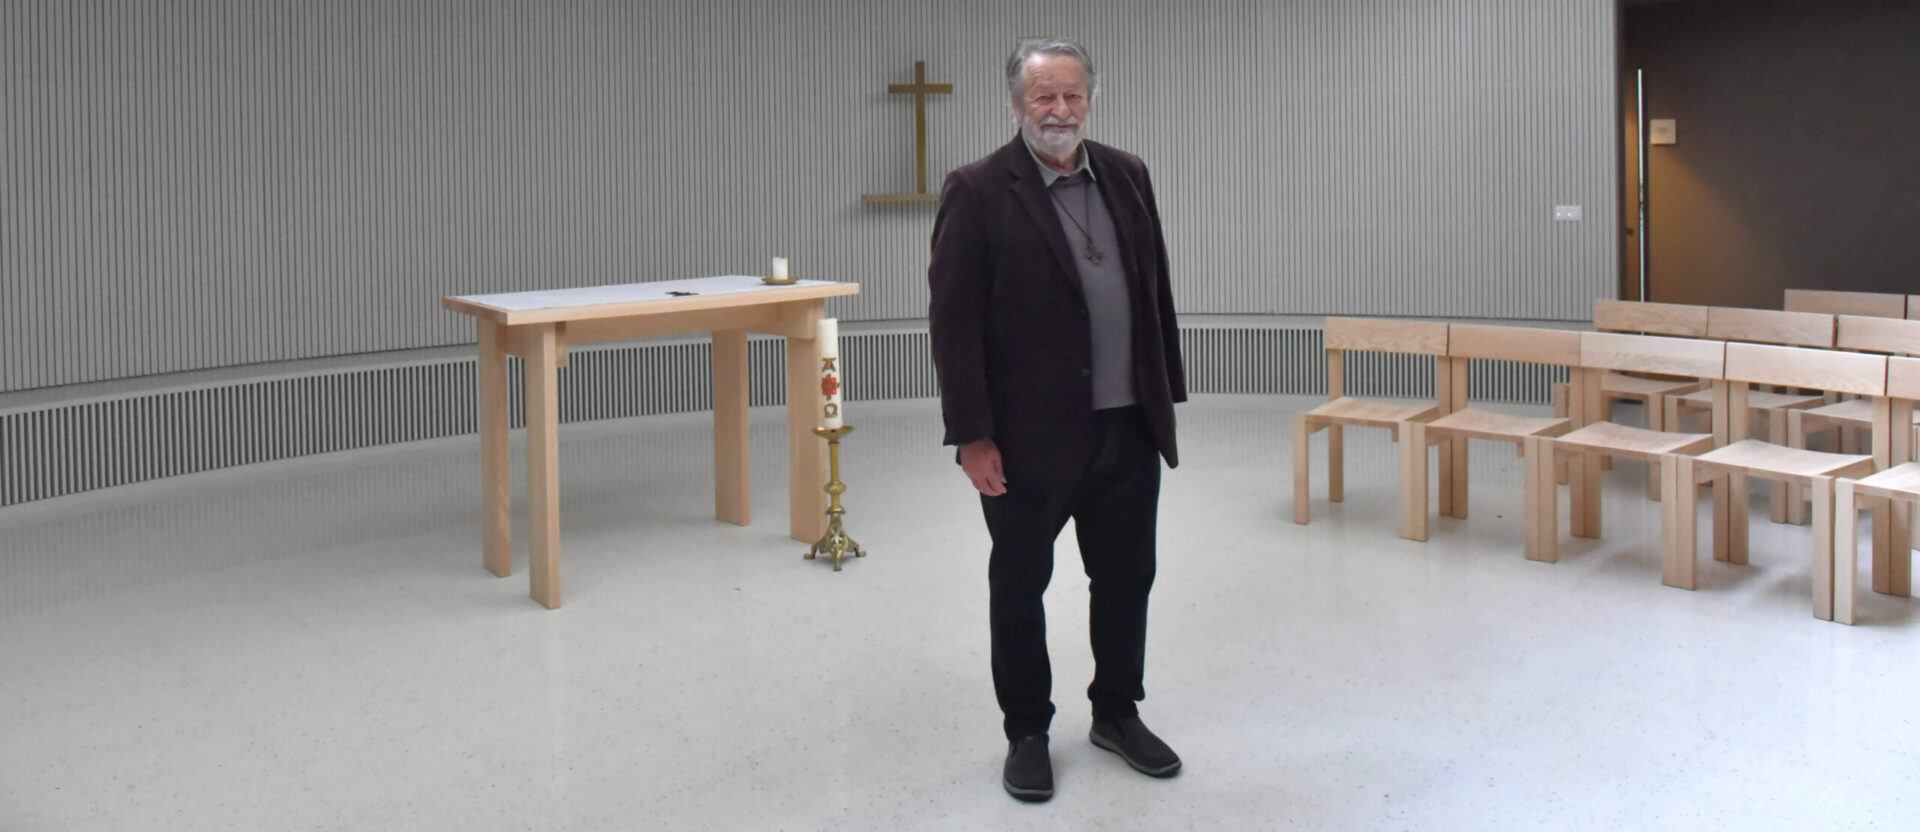 Maurice Zundel Space, a haven for “meaning seekers” – Swiss Catholic Portal